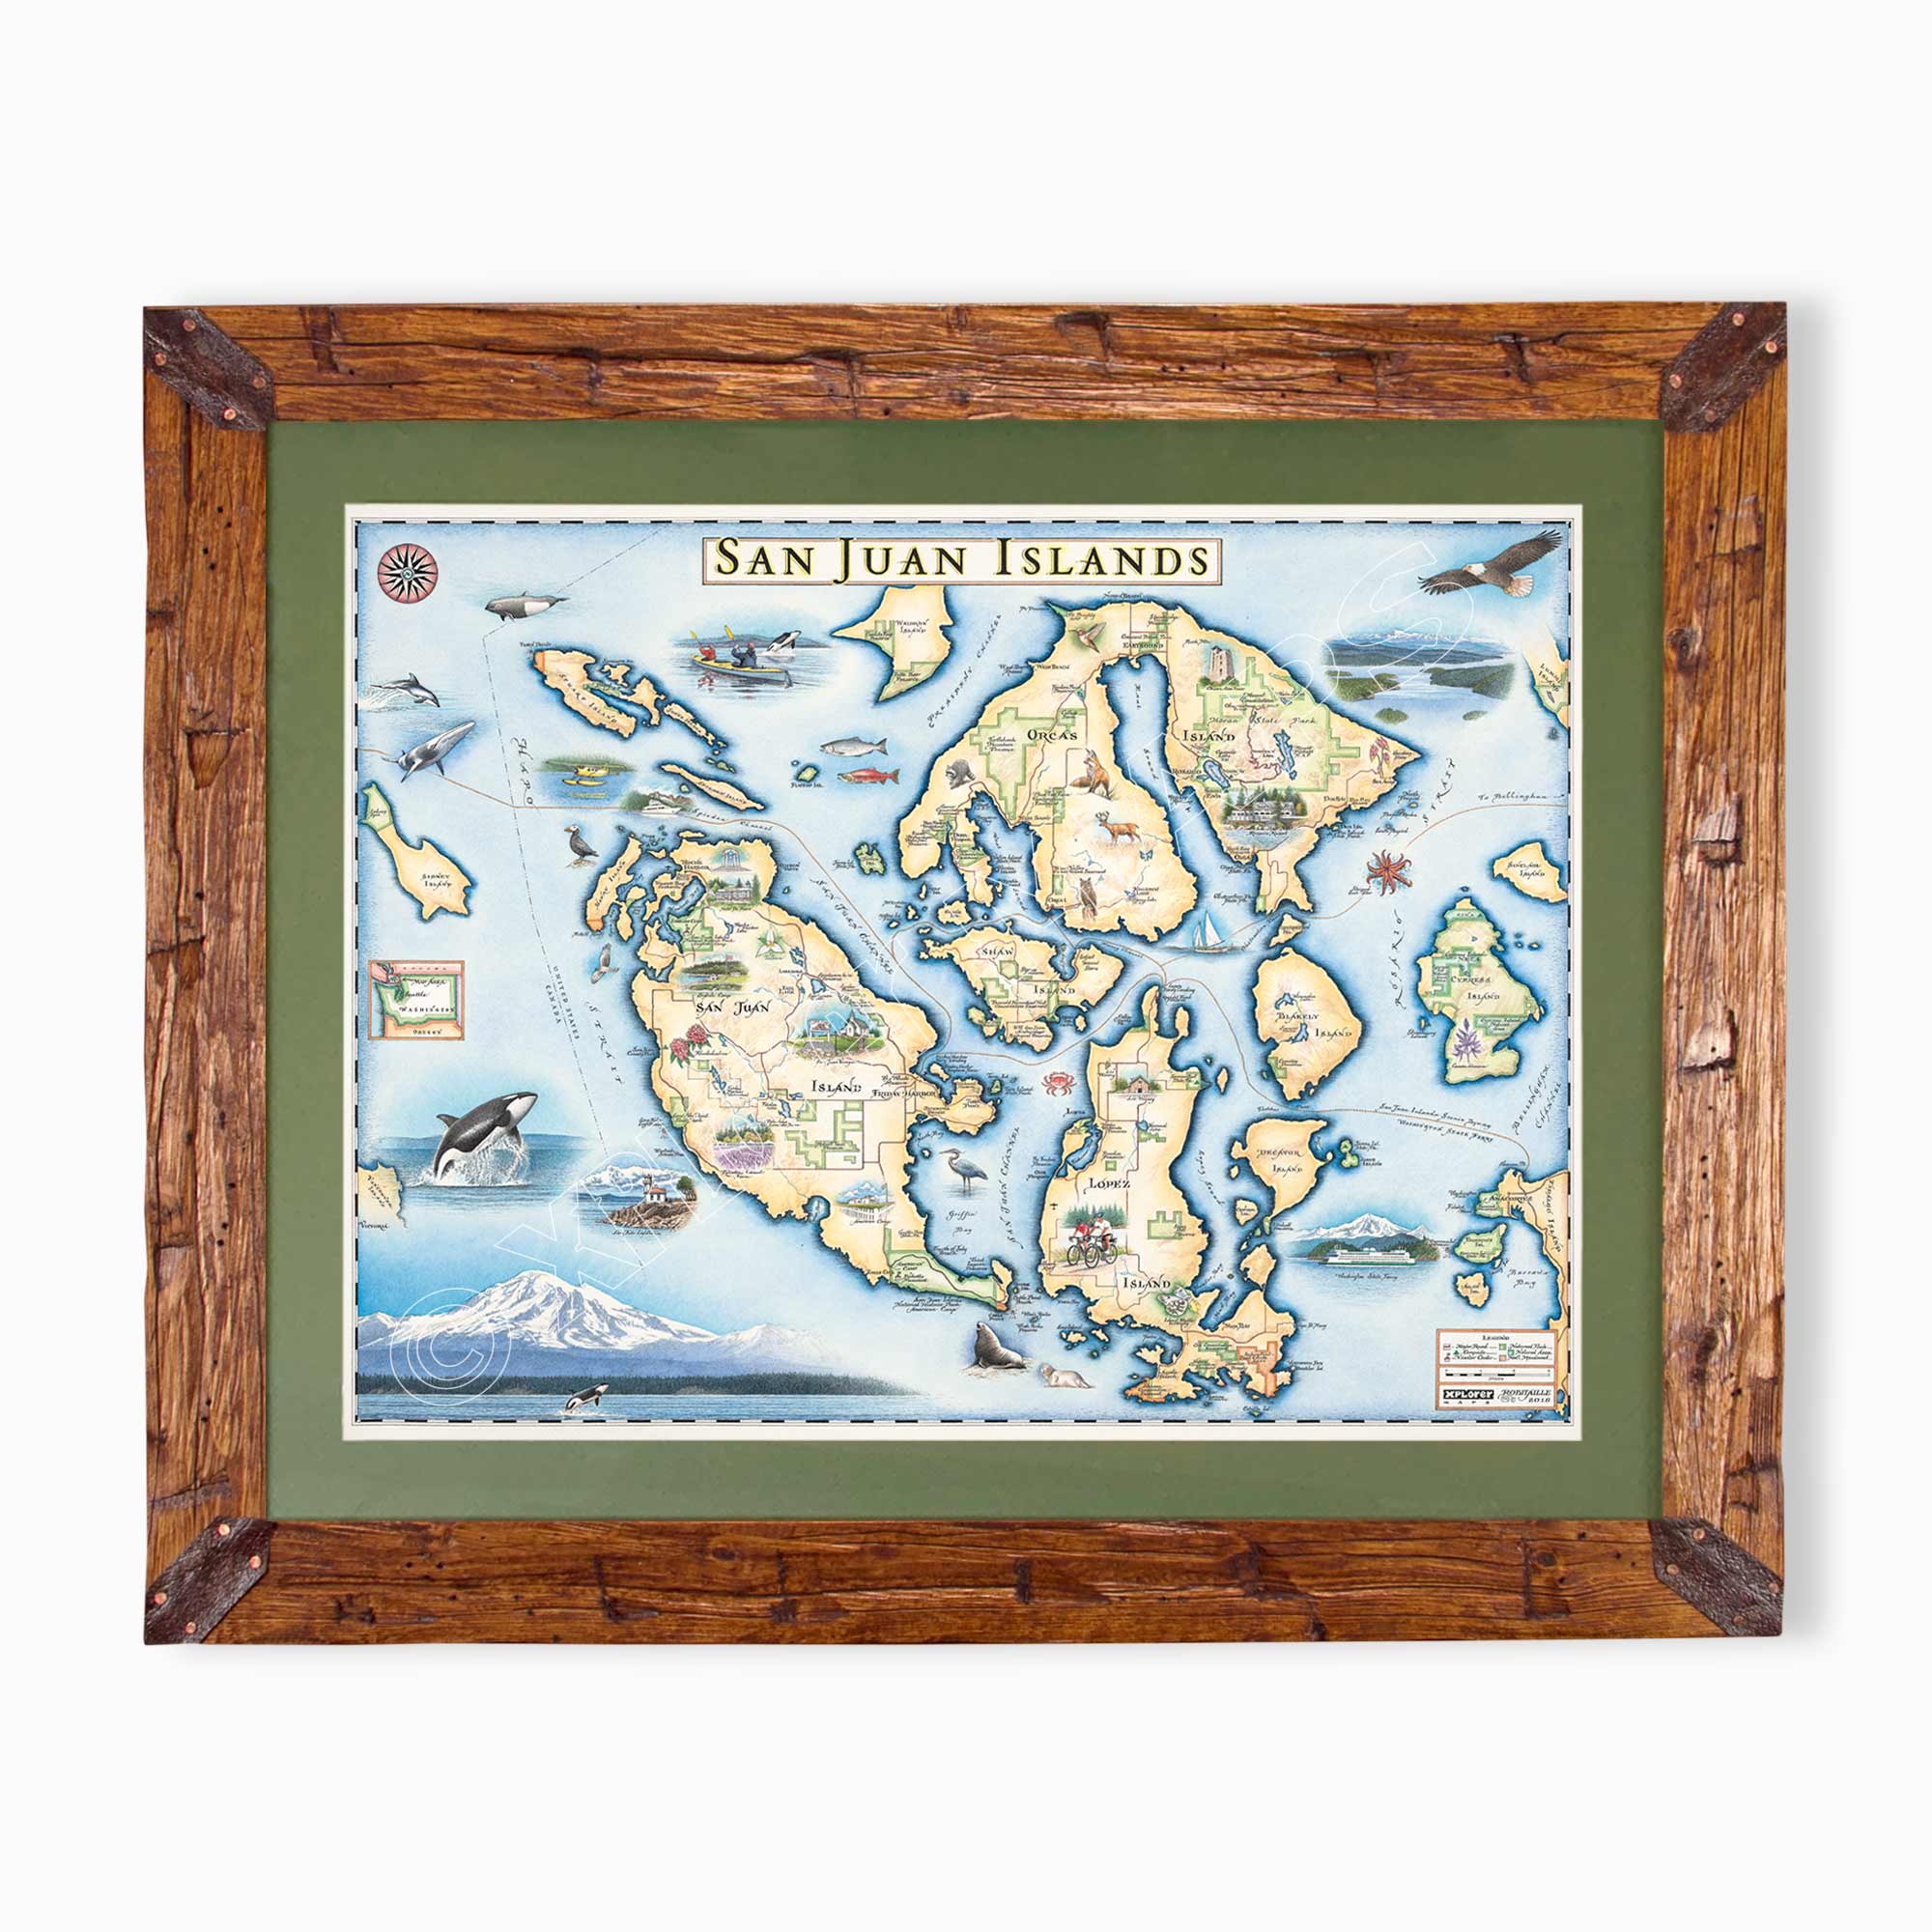 San Juan Islands hand-drawn map in earth tones blues and greens. The map print is framed in Montana hand-scraped pine with a green mat.